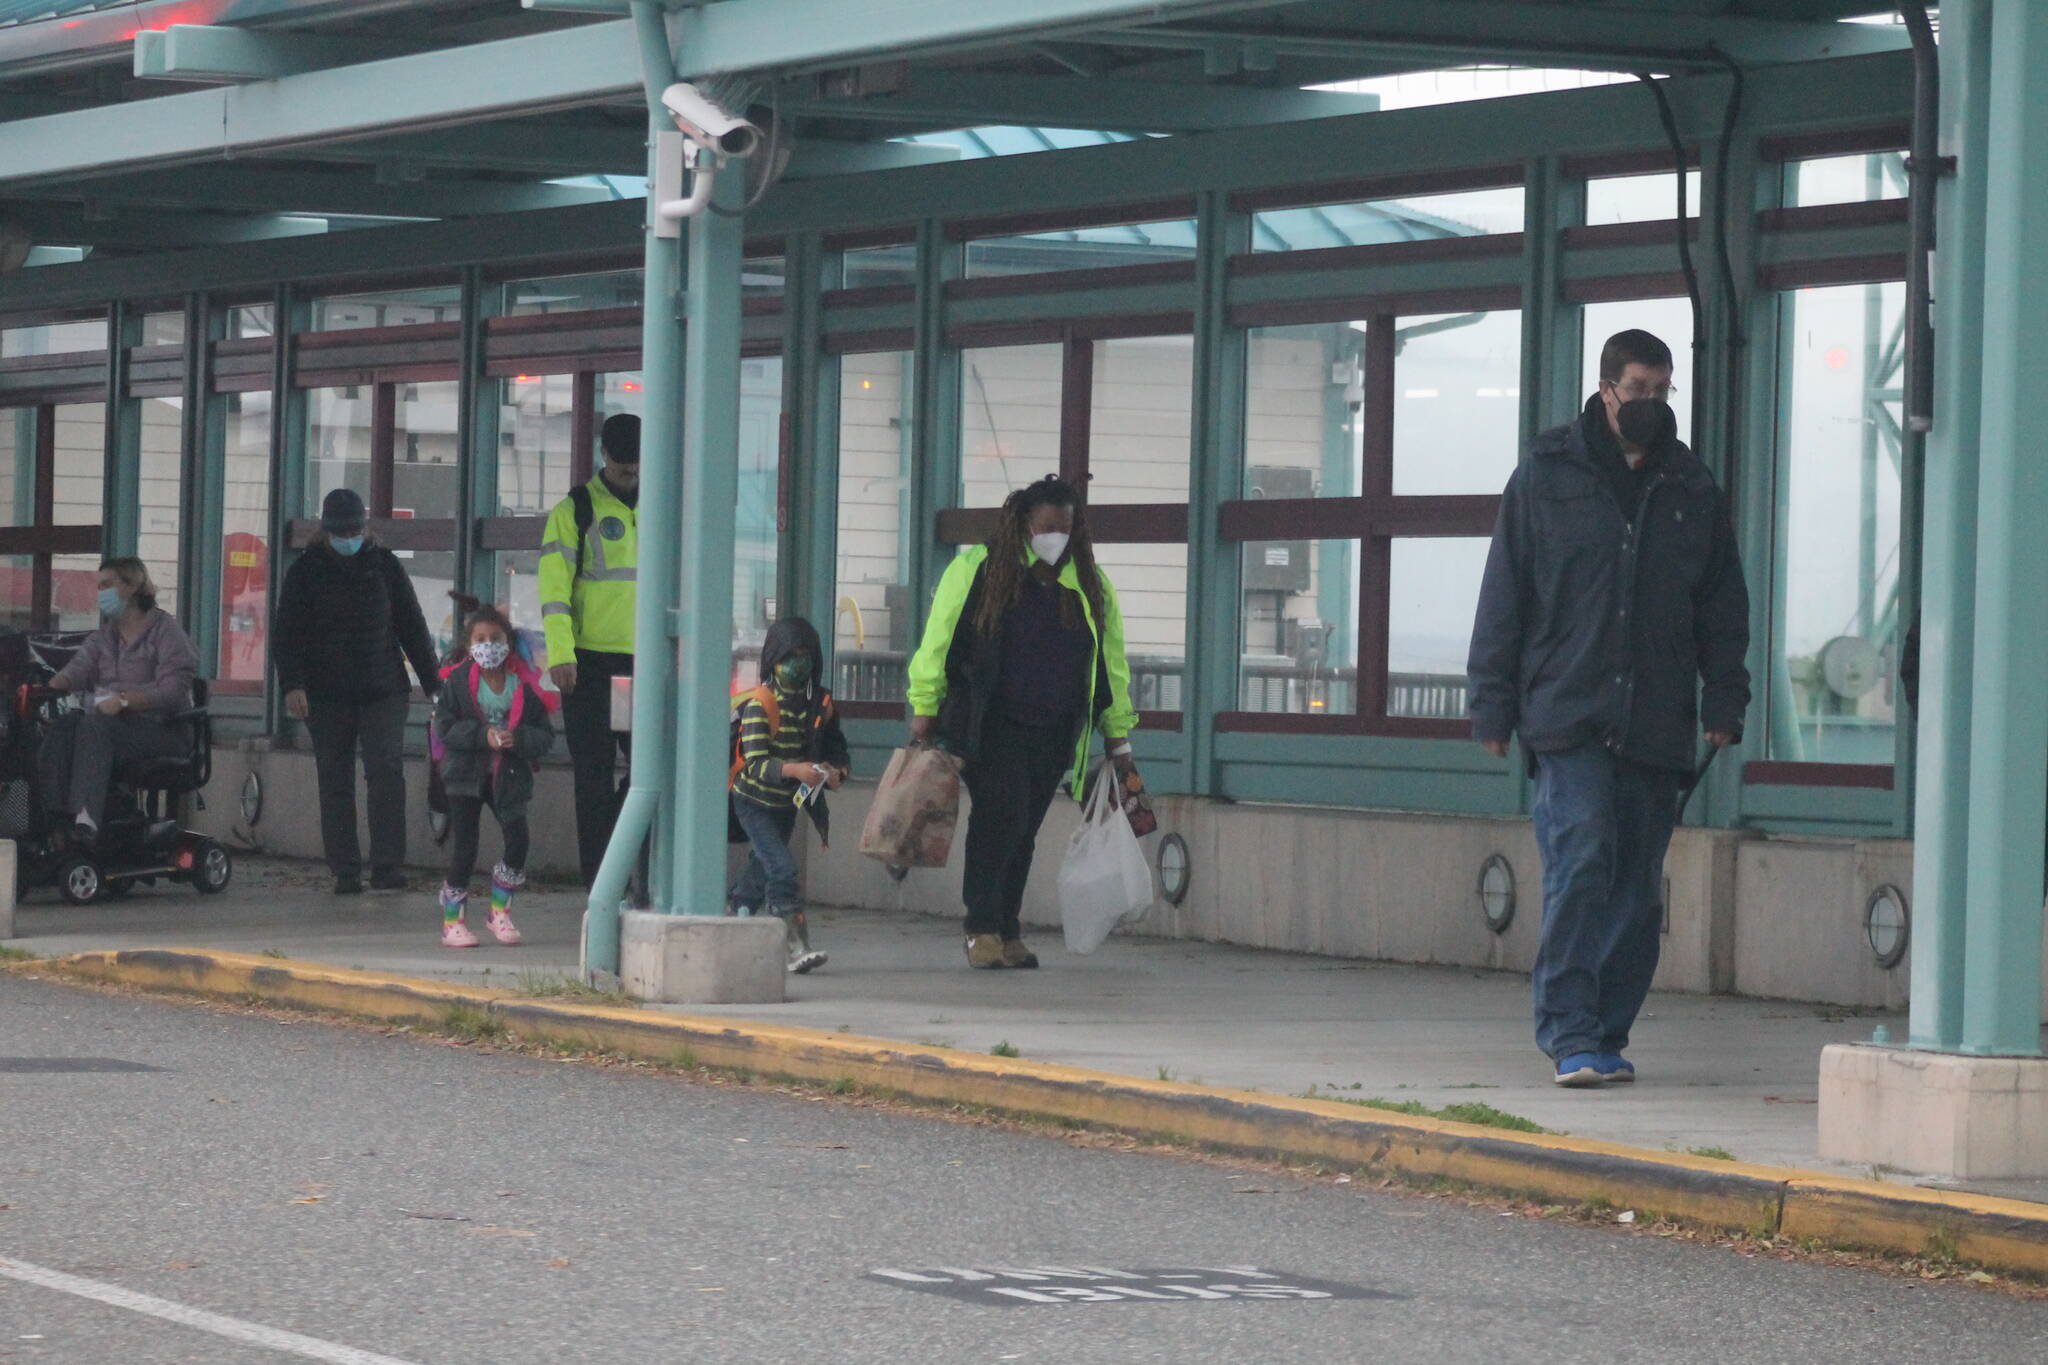 Photo by Kira Erickson/South Whidbey Record
Walk-on passengers that have disembarked the ferry at the Clinton terminal head away from the boat.